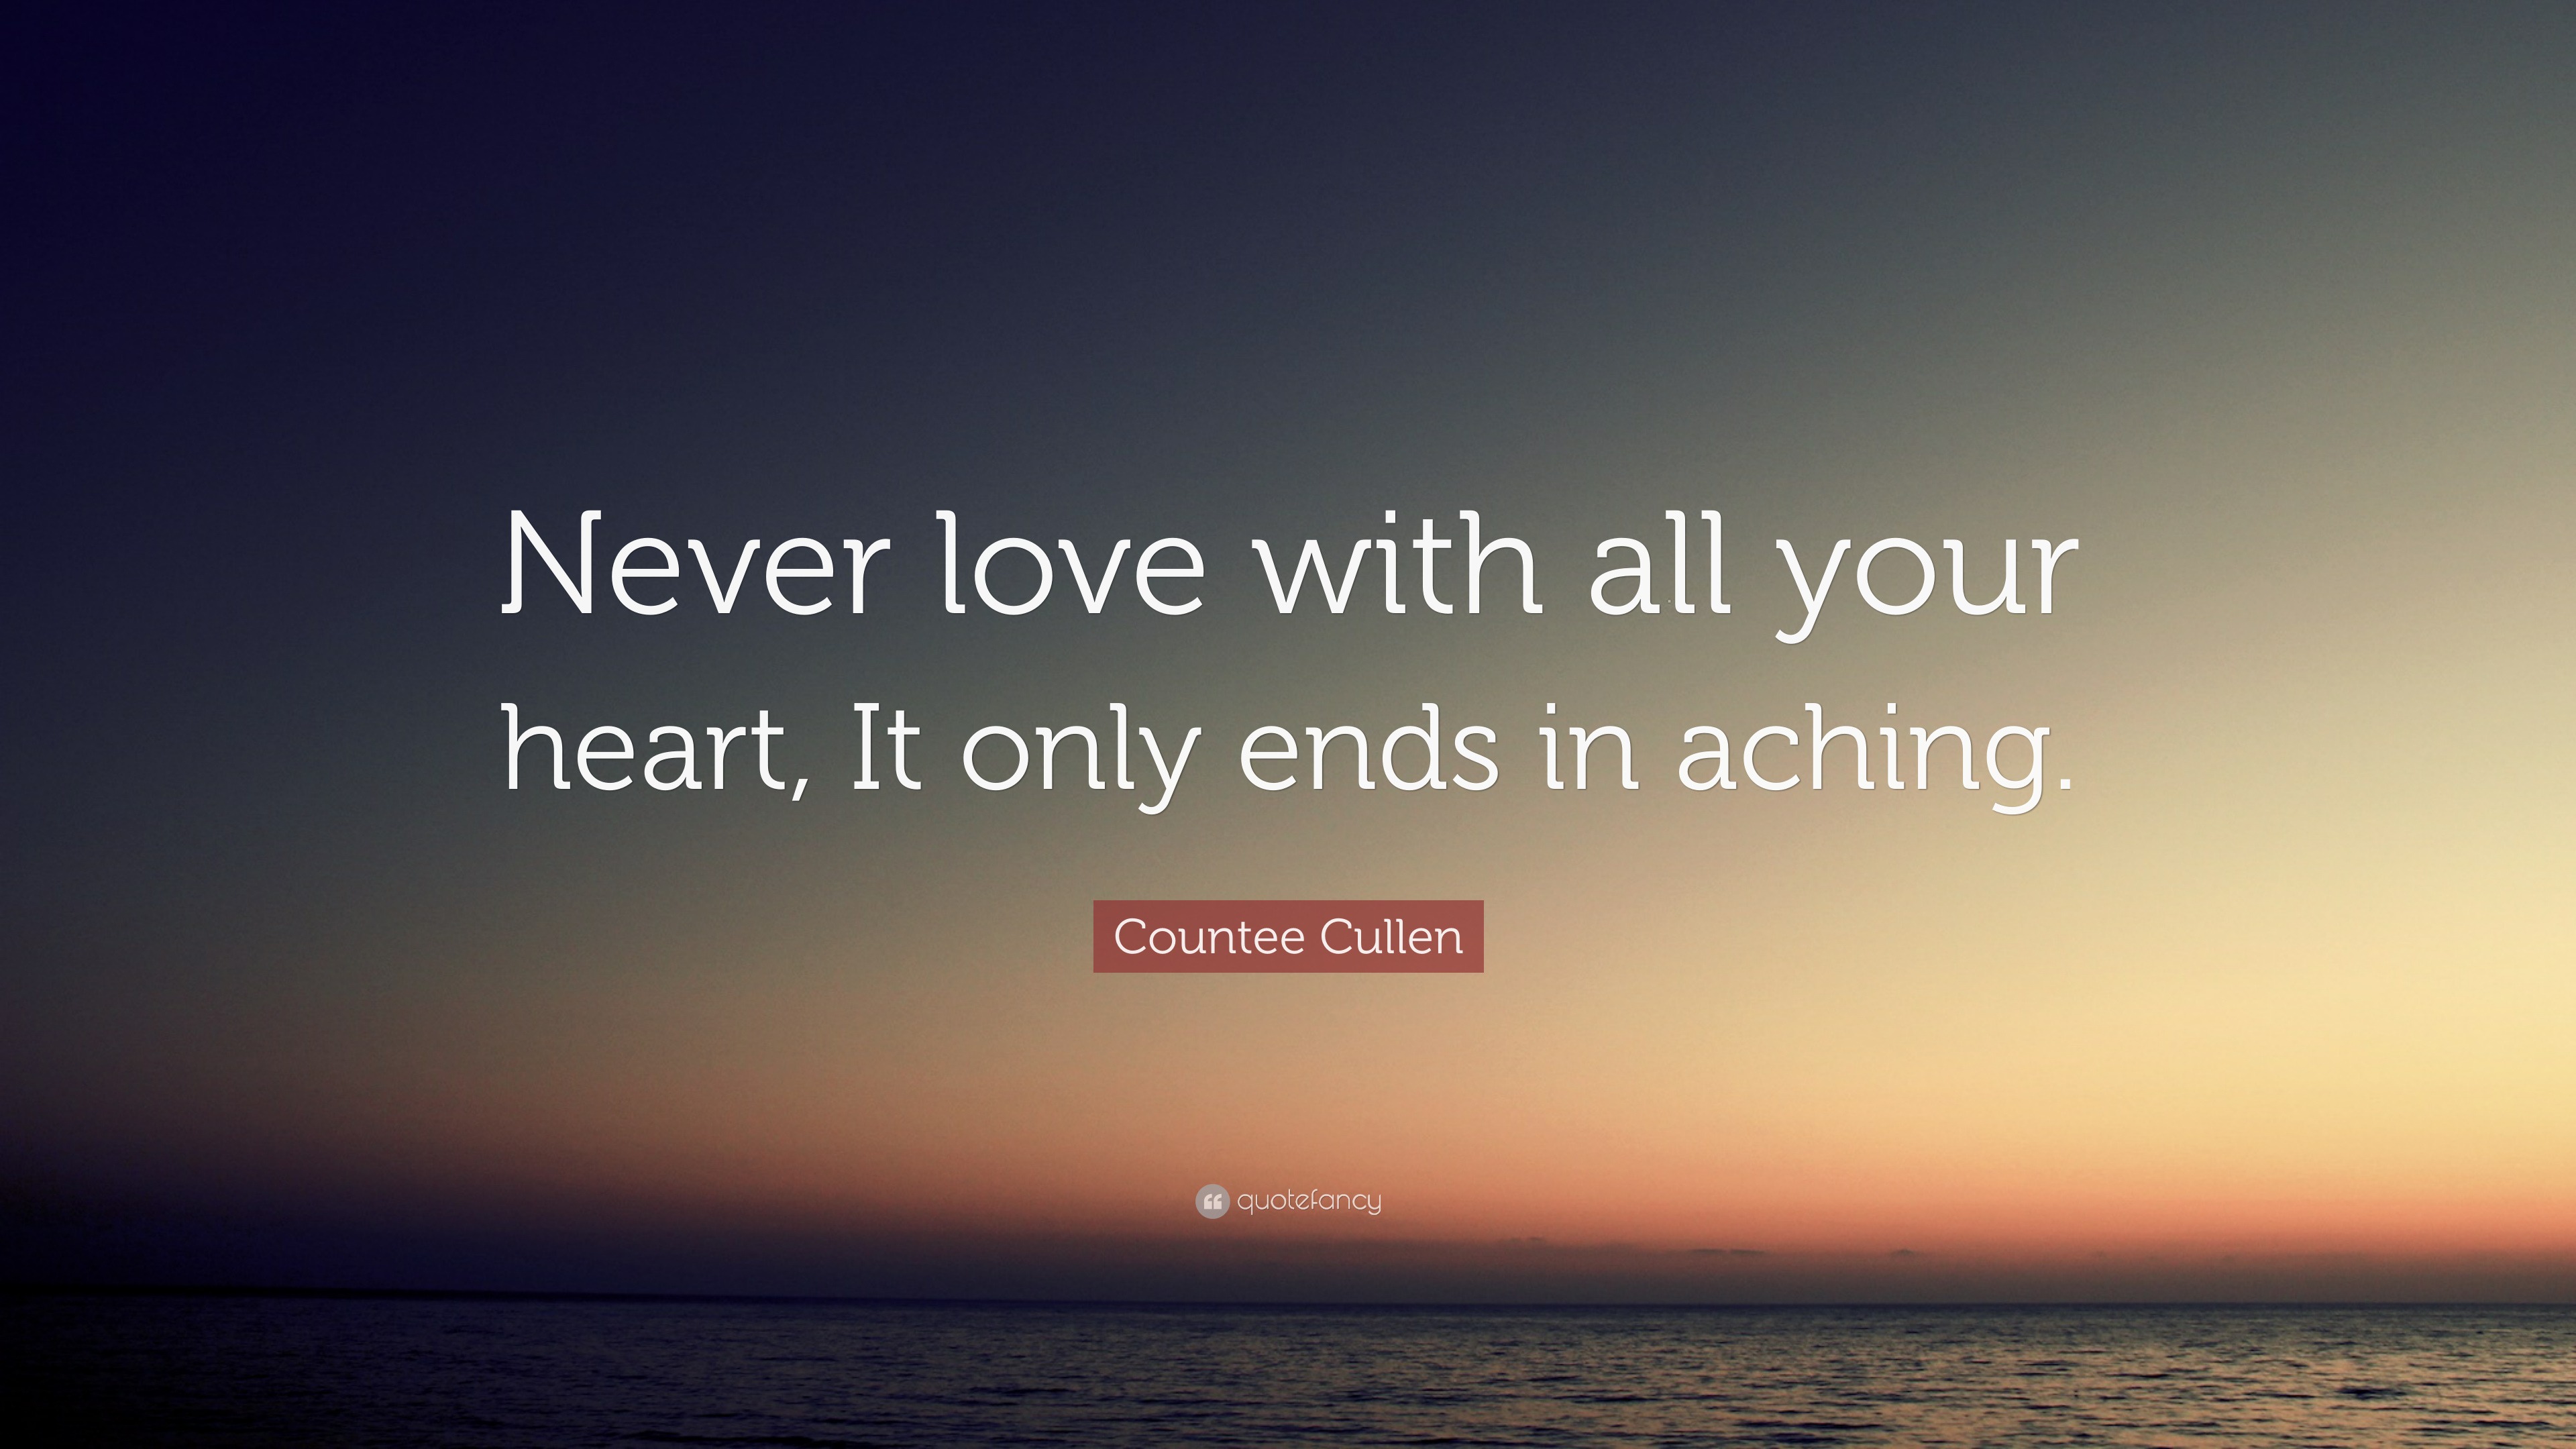 Countee Cullen Quote: “Never love with all your heart, It only ends in ...